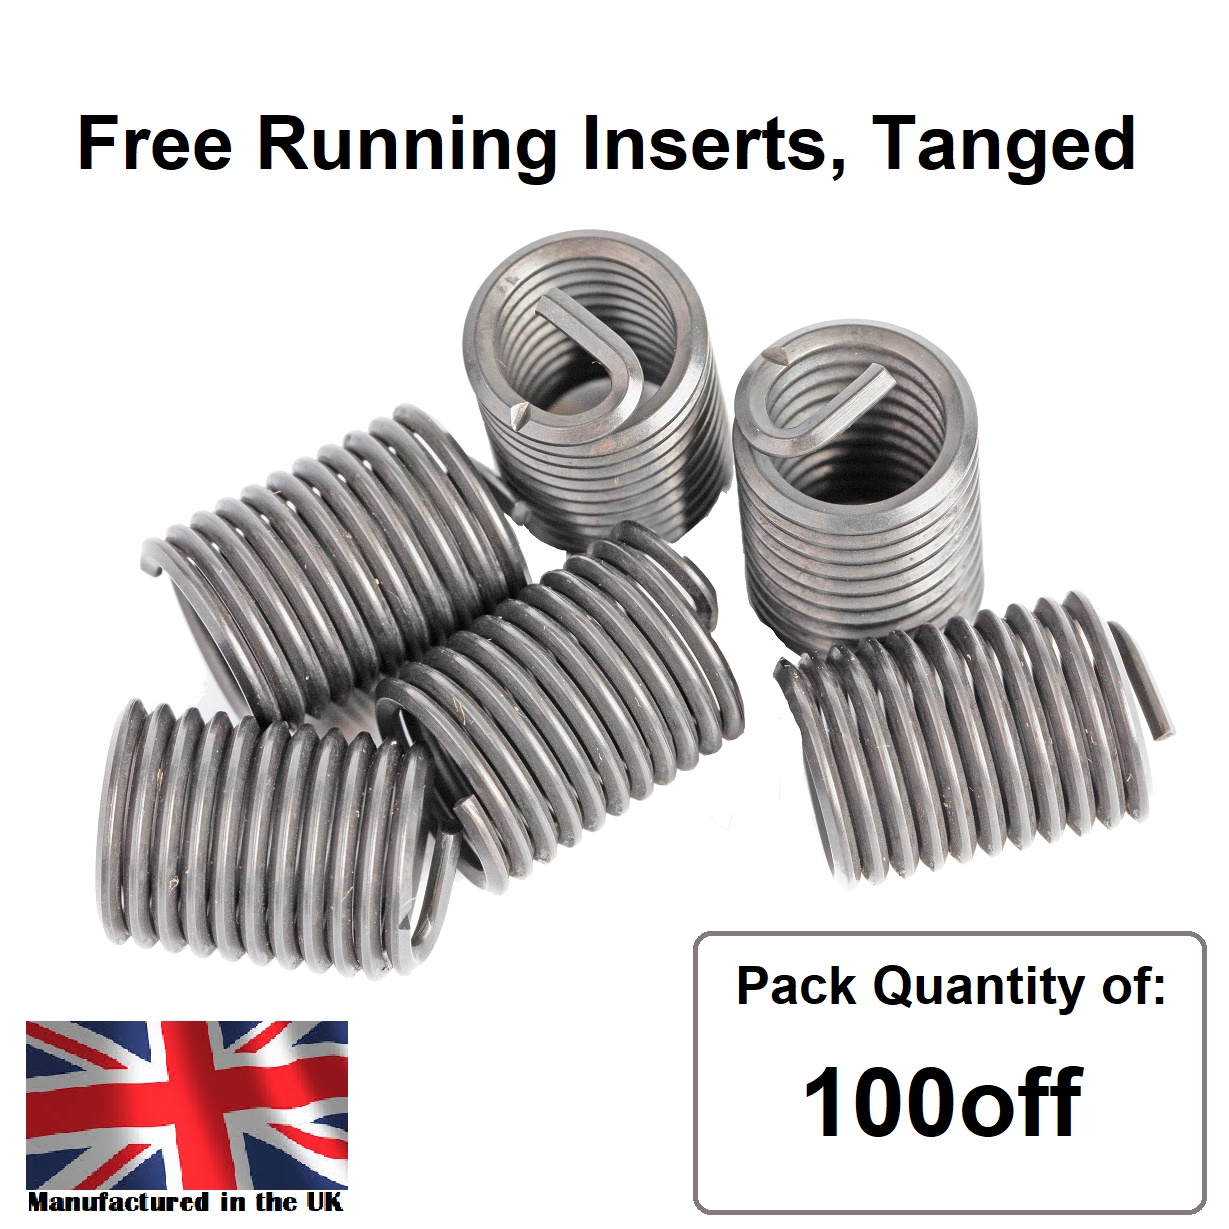 M2.5 x 0.45 x 1.5D Metric Coarse, Free Running, Tanged, Wire Thread Repair Insert, 304/A2 Stainless (Pack 100)